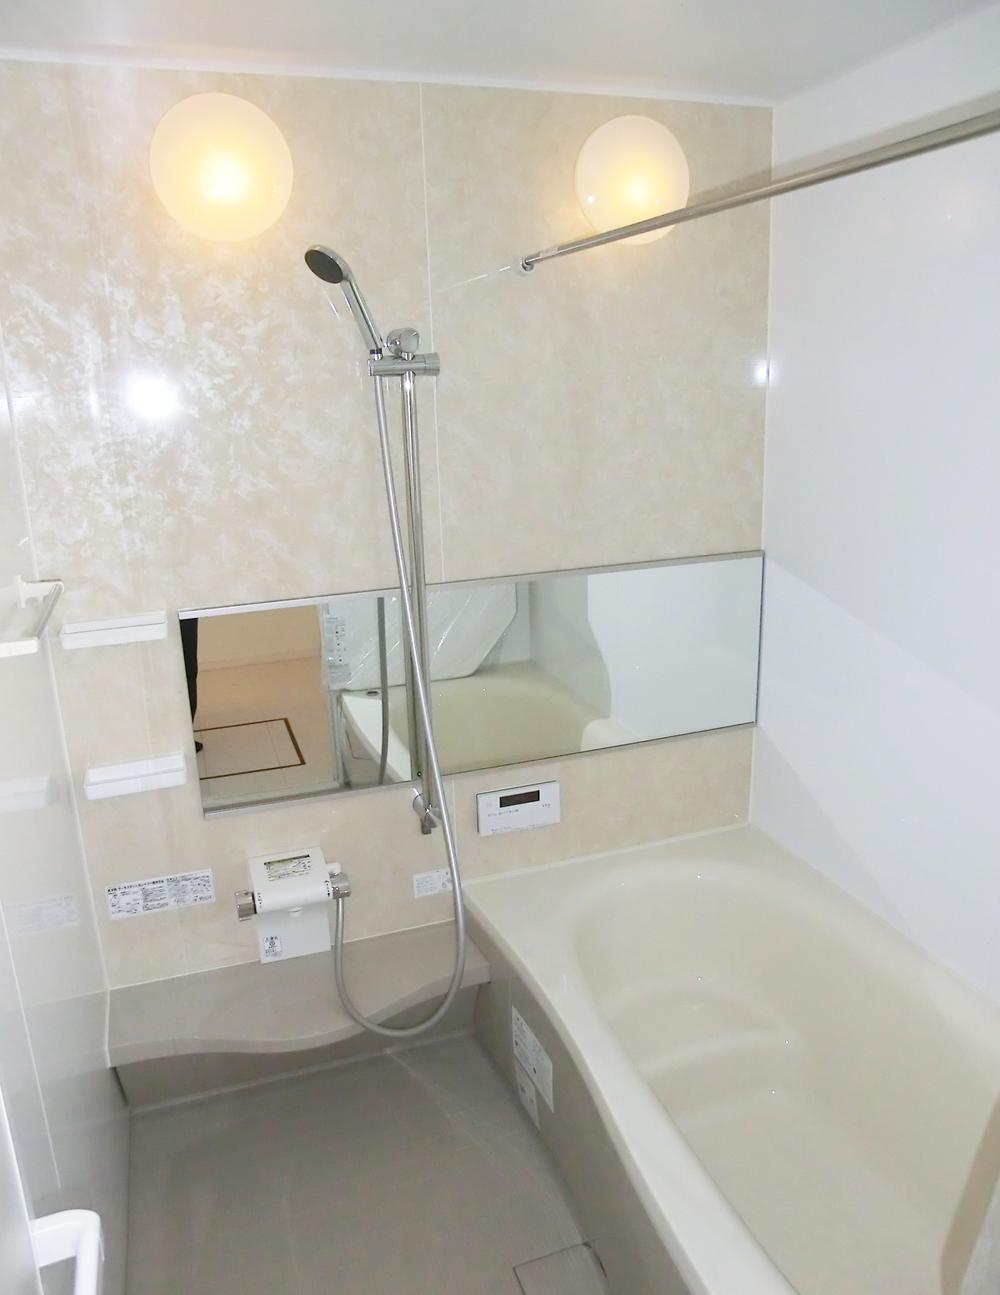 Same specifications photo (bathroom). You can color select